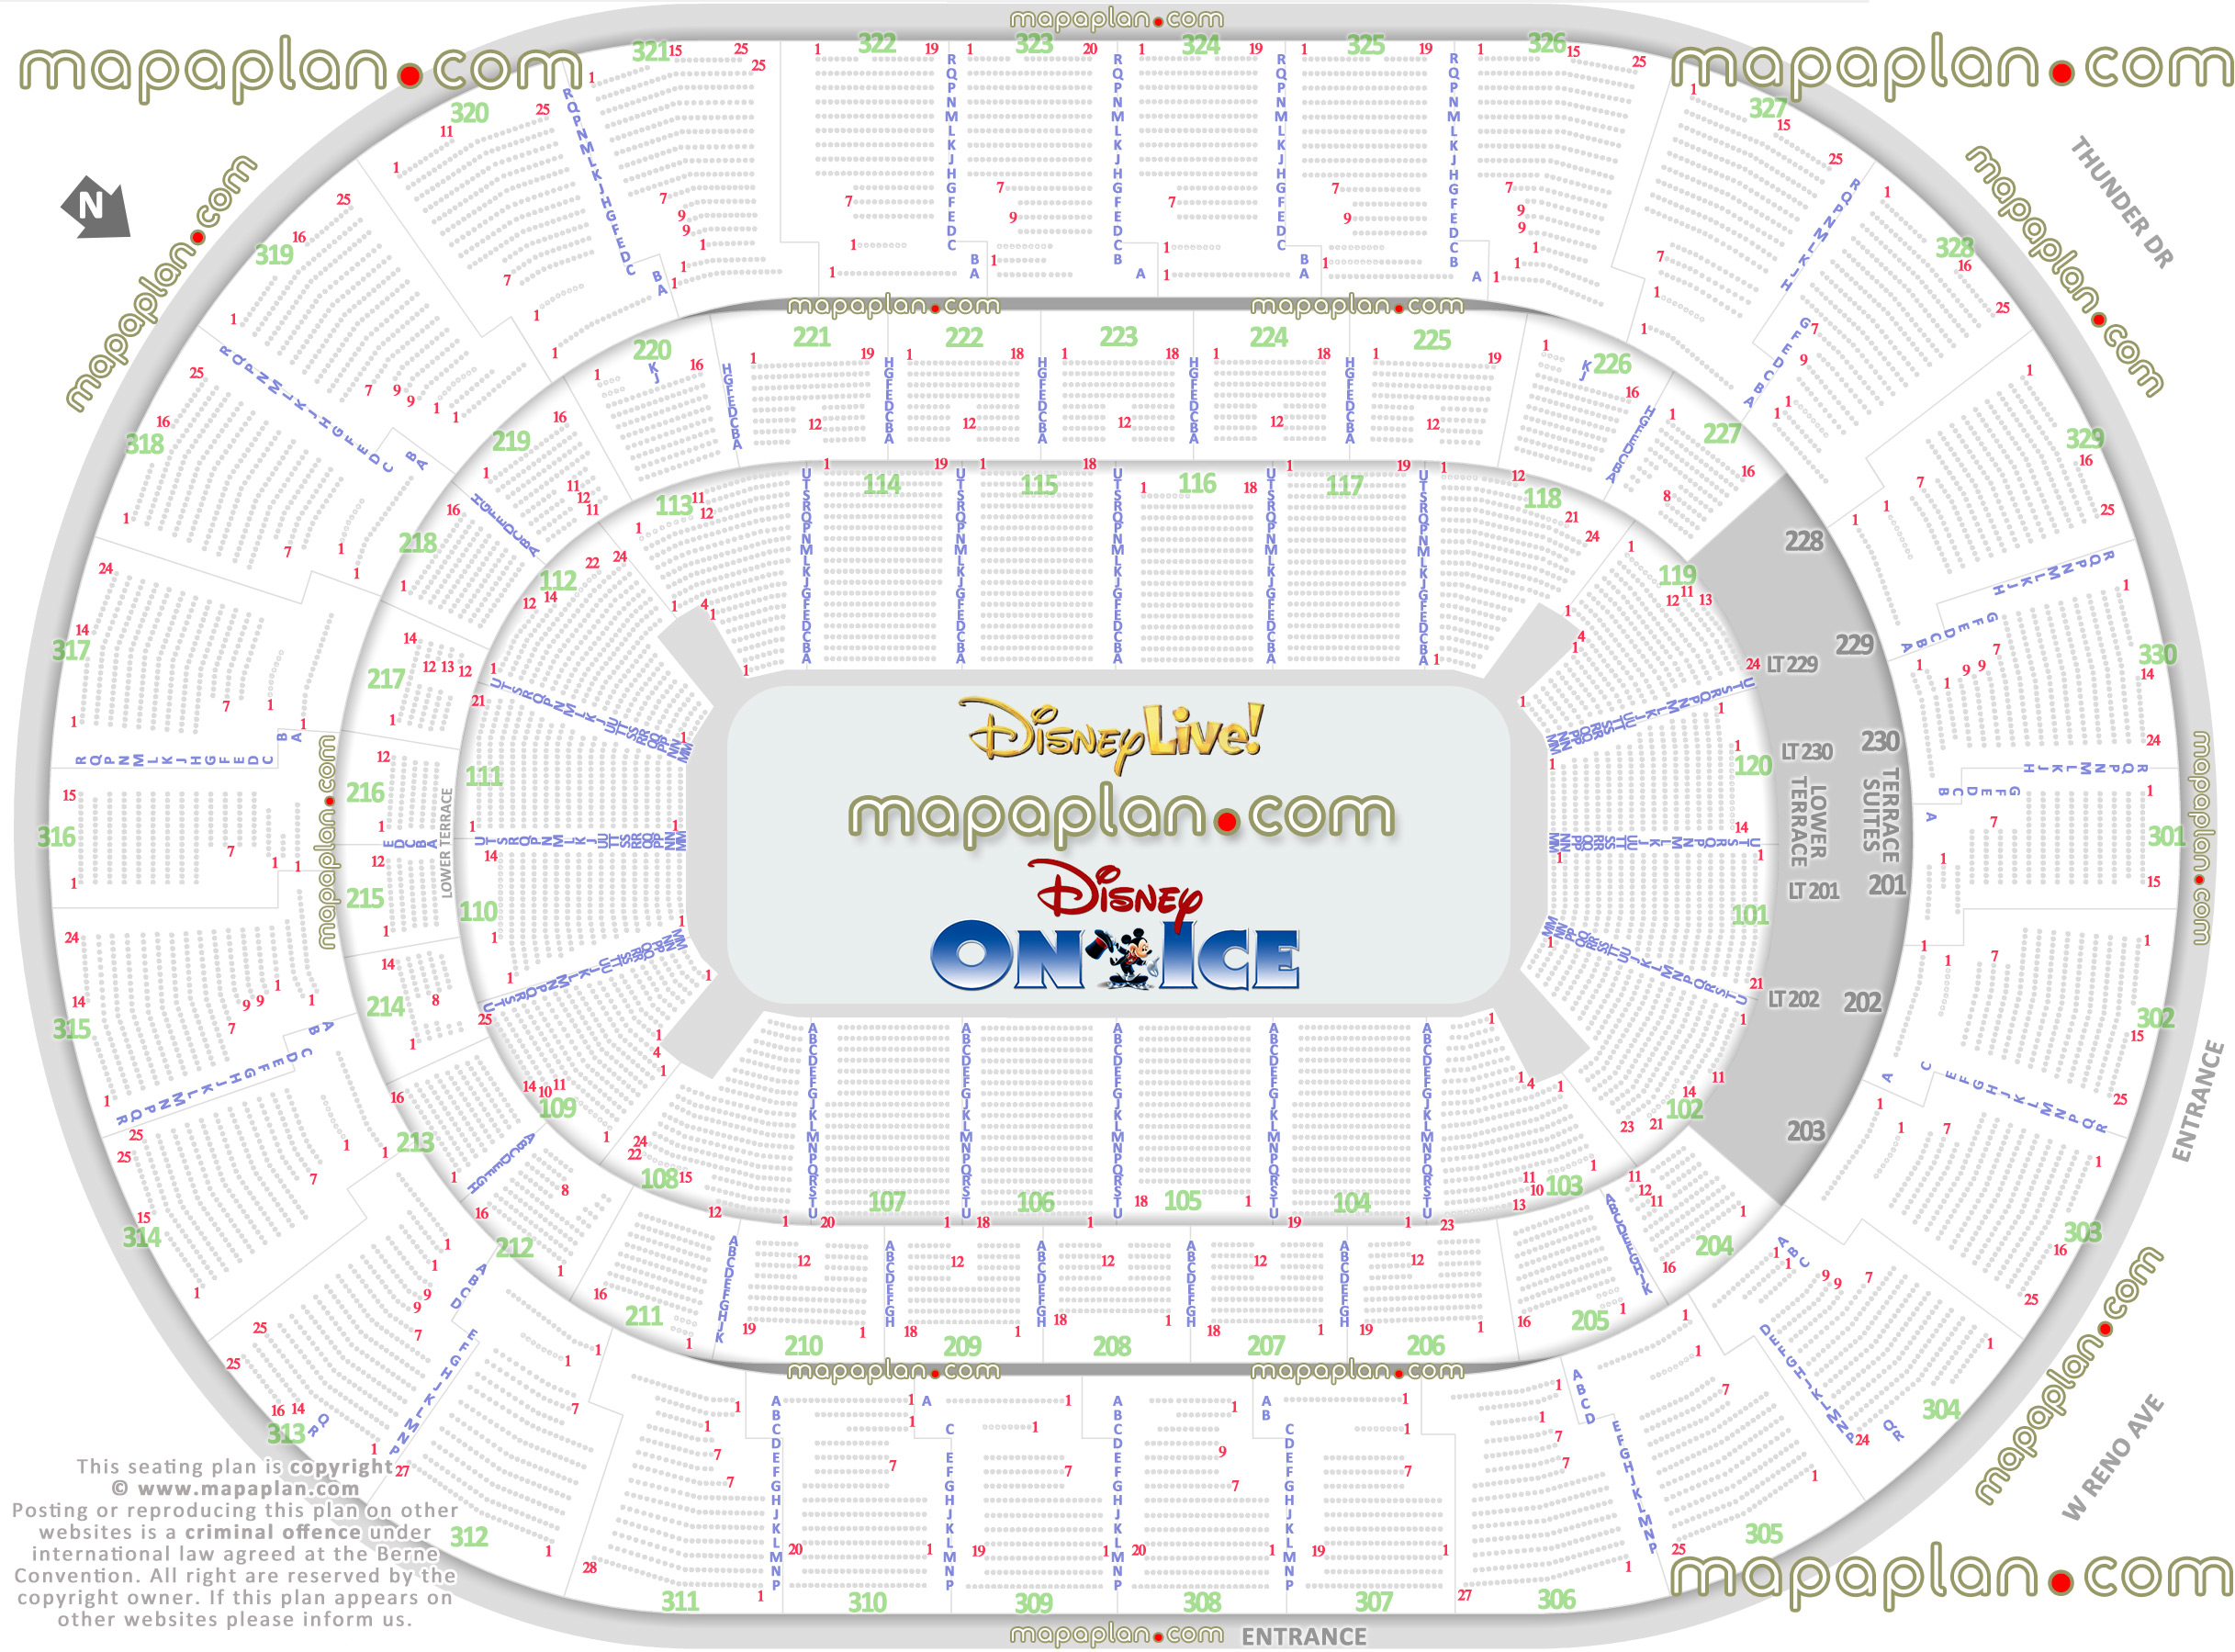 disney ice disney live oklahoma city ok usa best seat finder 3d interactive tool precise detailed aisle seat row numbering location data plan ice rink event floor level map lower bowl concourse club upper balcony seating suites terrace lounge boxes rows a b c d e f g h j k l m n p q r s t u Oklahoma City Chesapeake Energy Arena seating chart